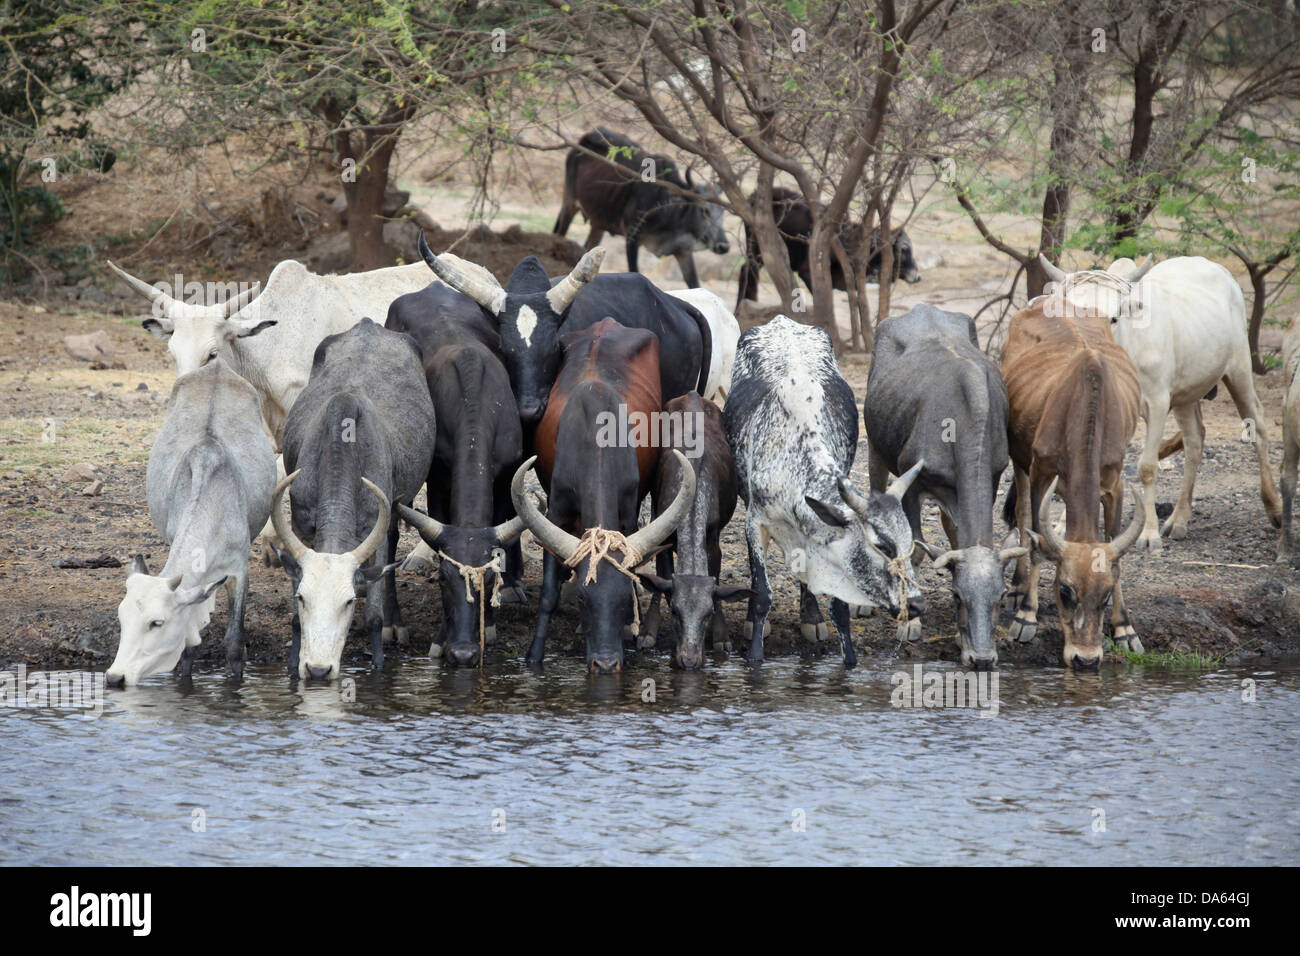 Cows, Awasch, Africa, cow, cows, watering hole, watering place, Ethiopia, Africa Stock Photo